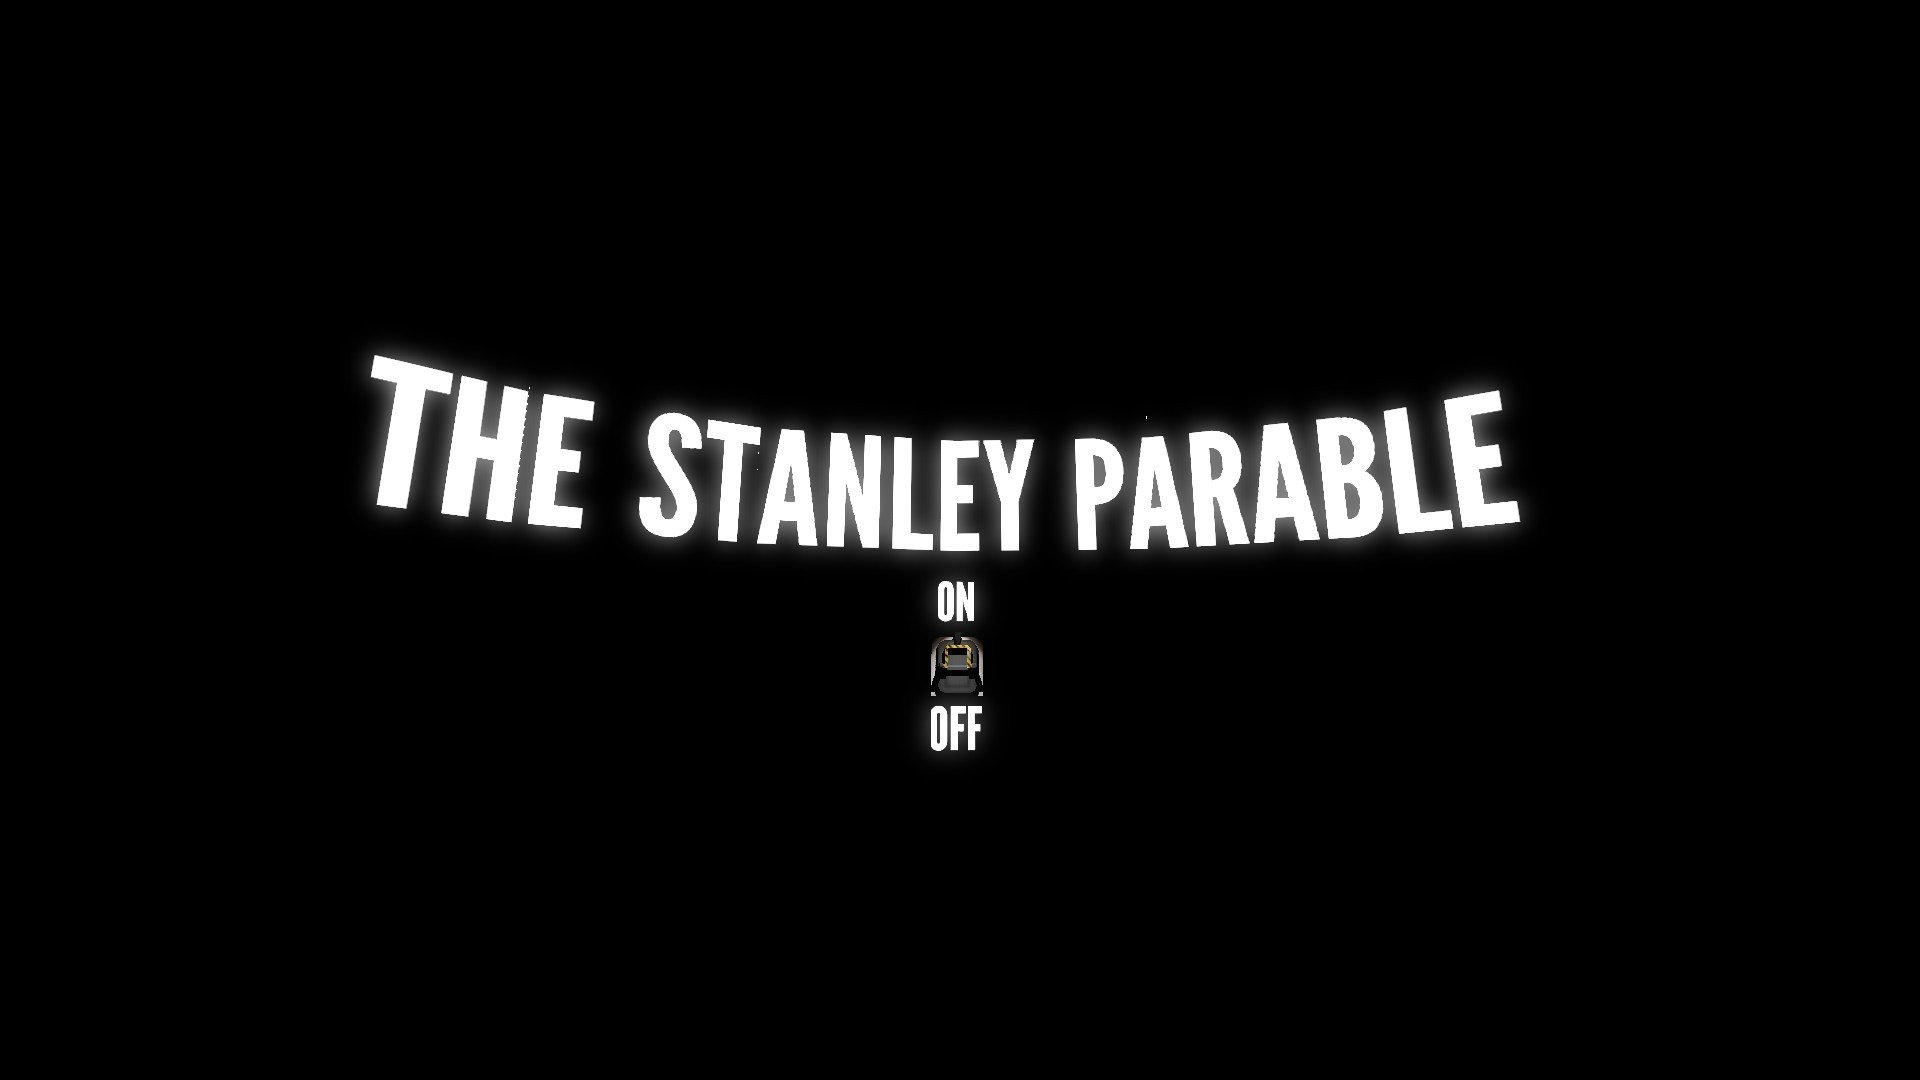 Стенли перебол. The Stanley Parable Стэнли. Игра the Stanley Parable. Yhe Stanly Parable. Рабочий стол the Stanley Parable.